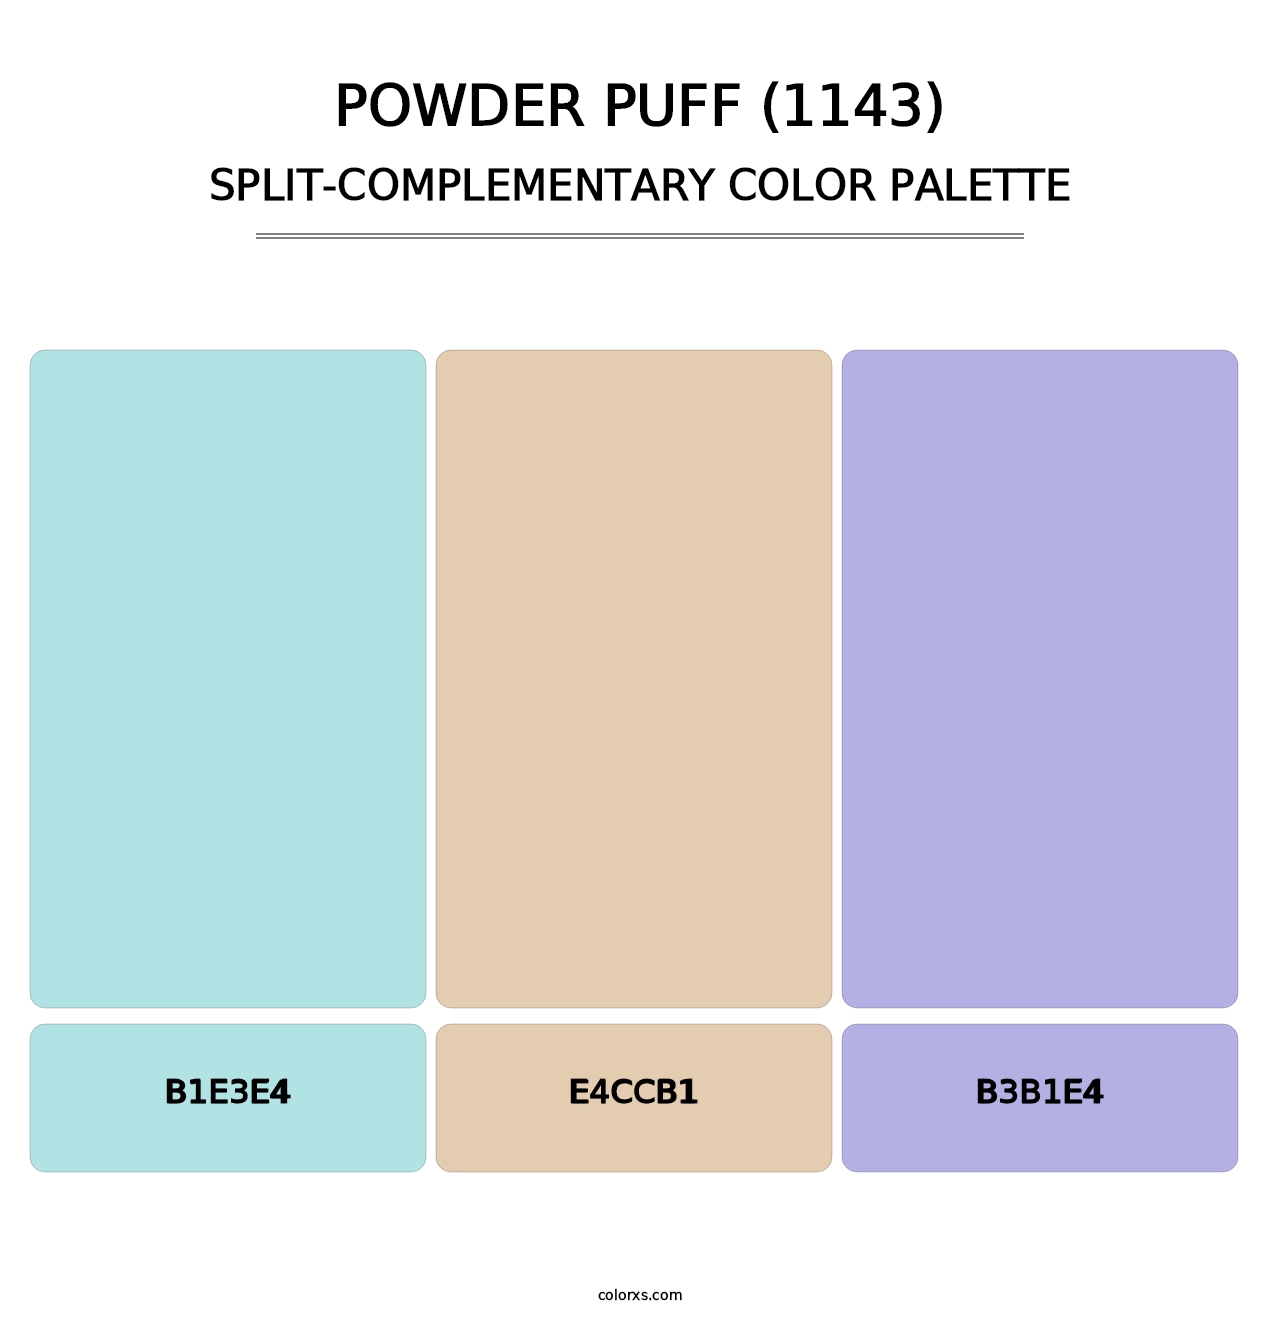 Powder Puff (1143) - Split-Complementary Color Palette